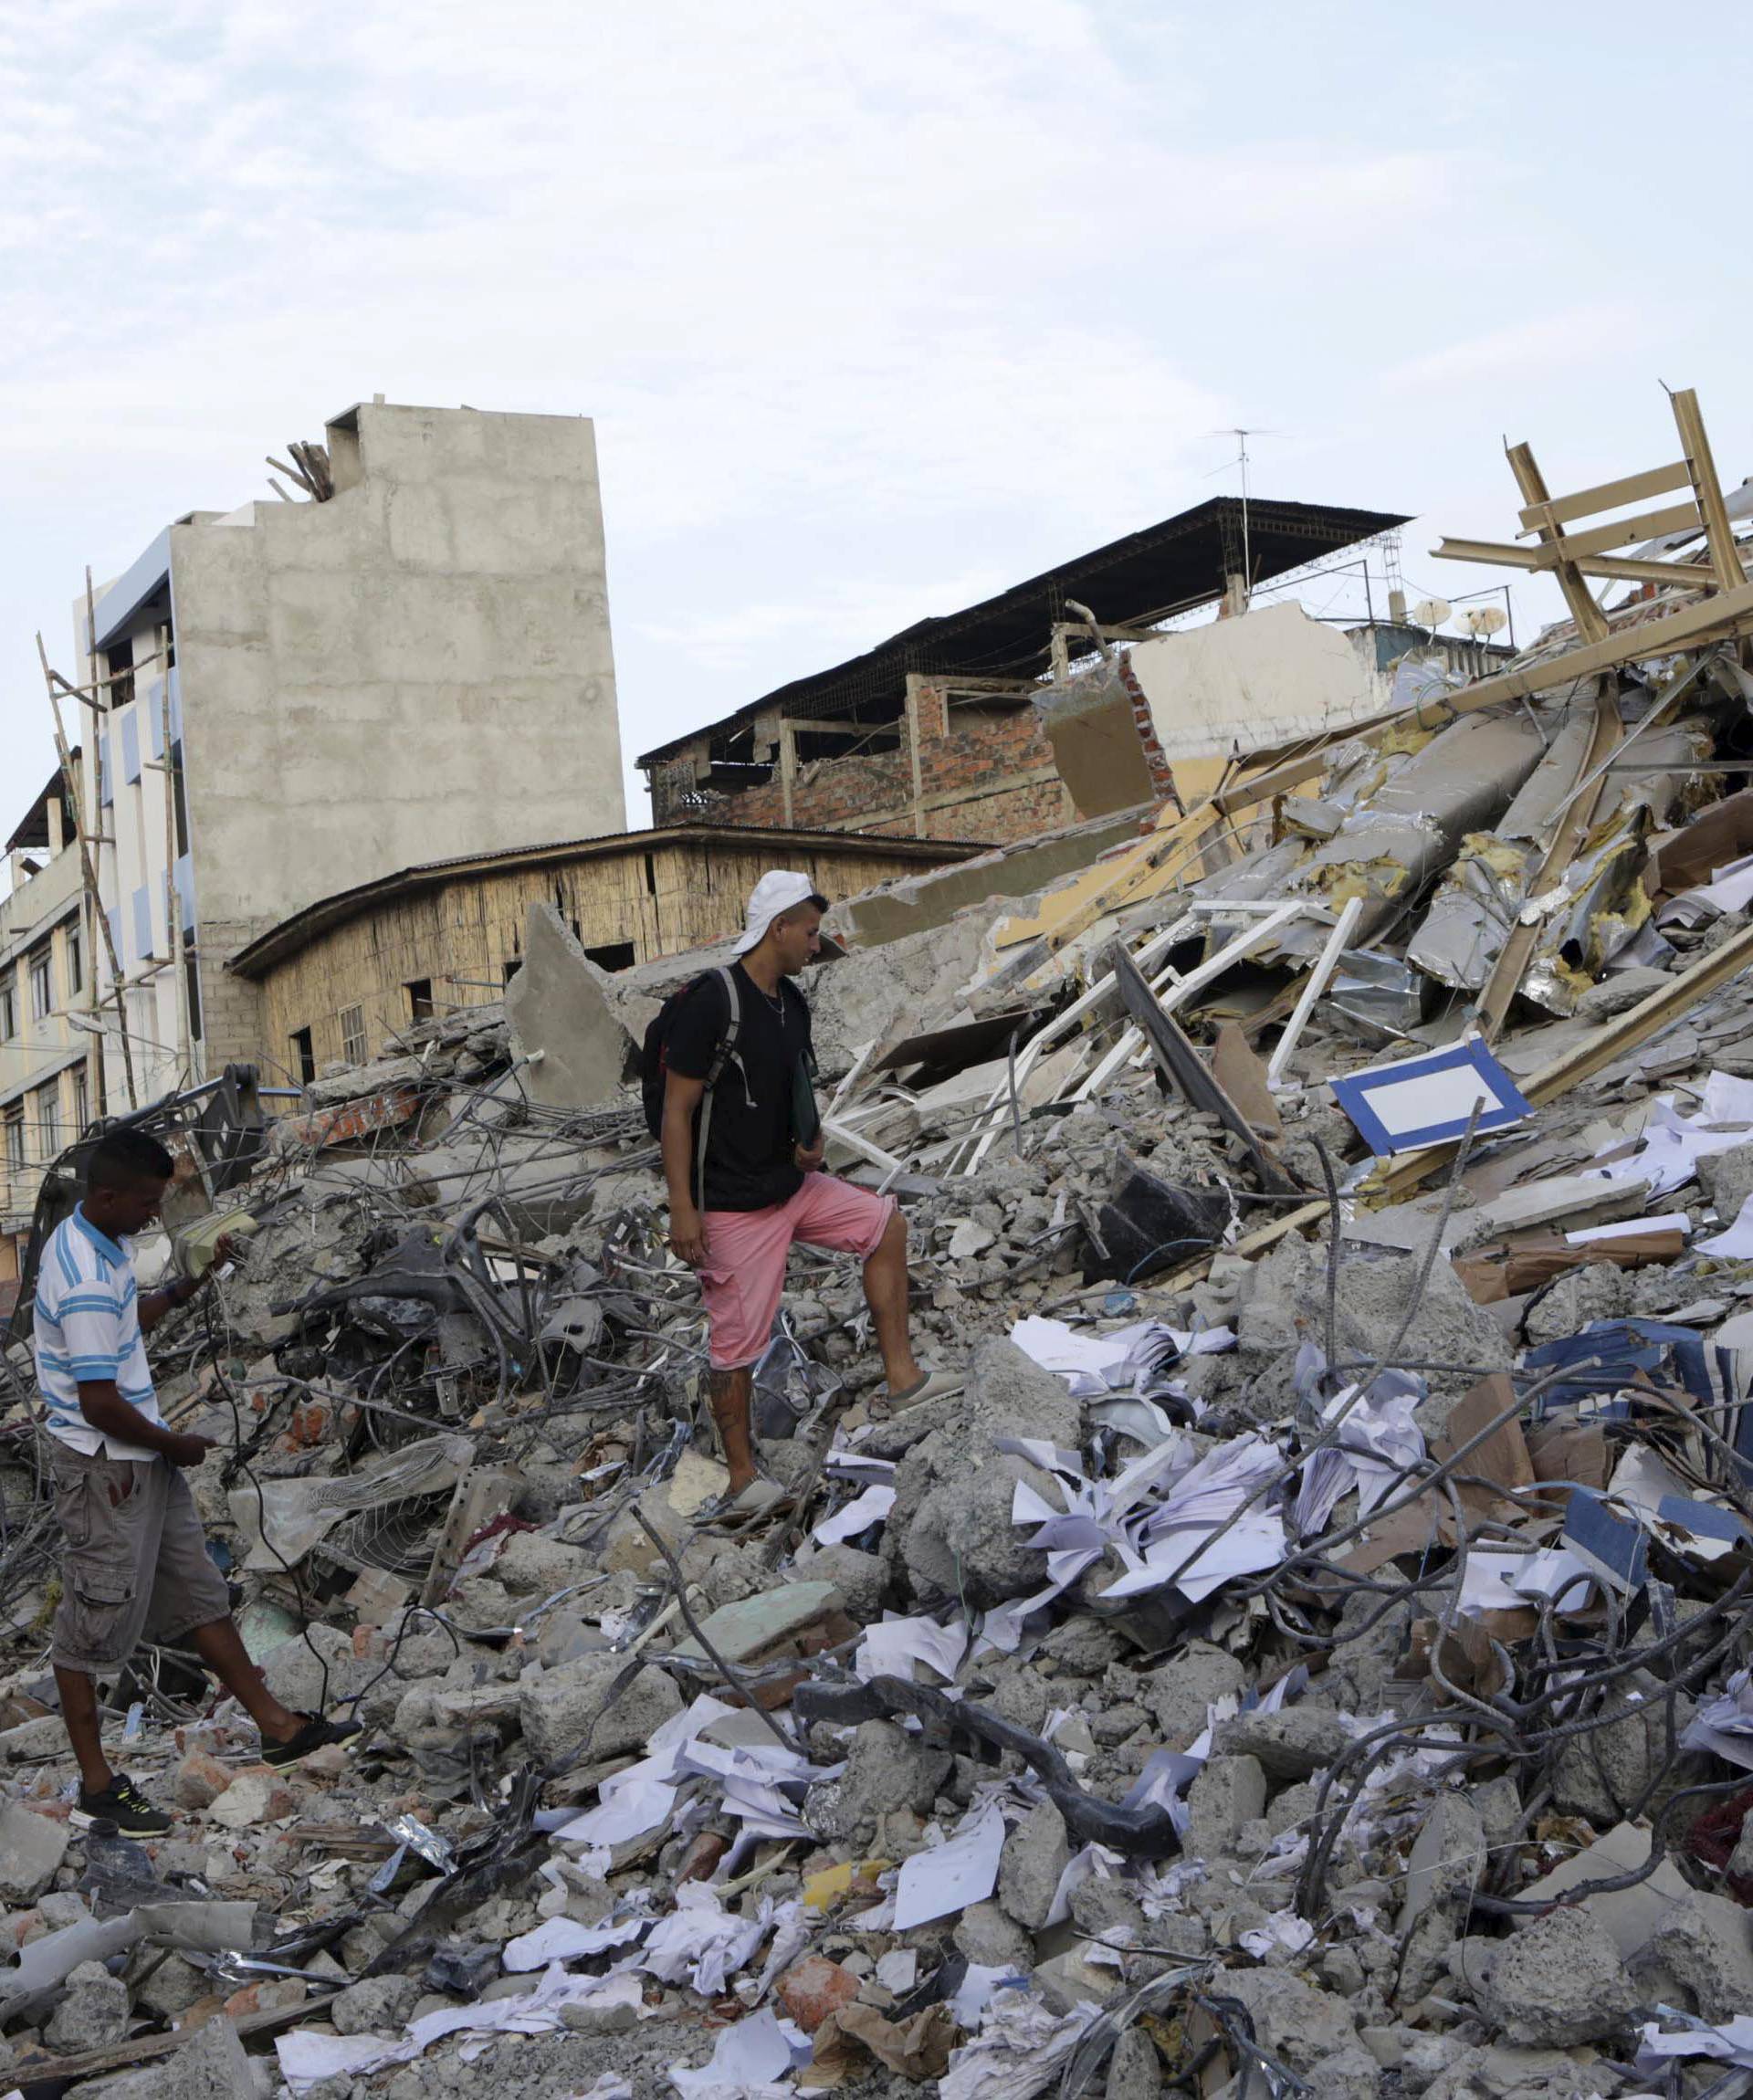 Residents walk on debris of a collapsed hotel after an earthquake struck off the Pacific coast, in Portoviejo, Ecuador